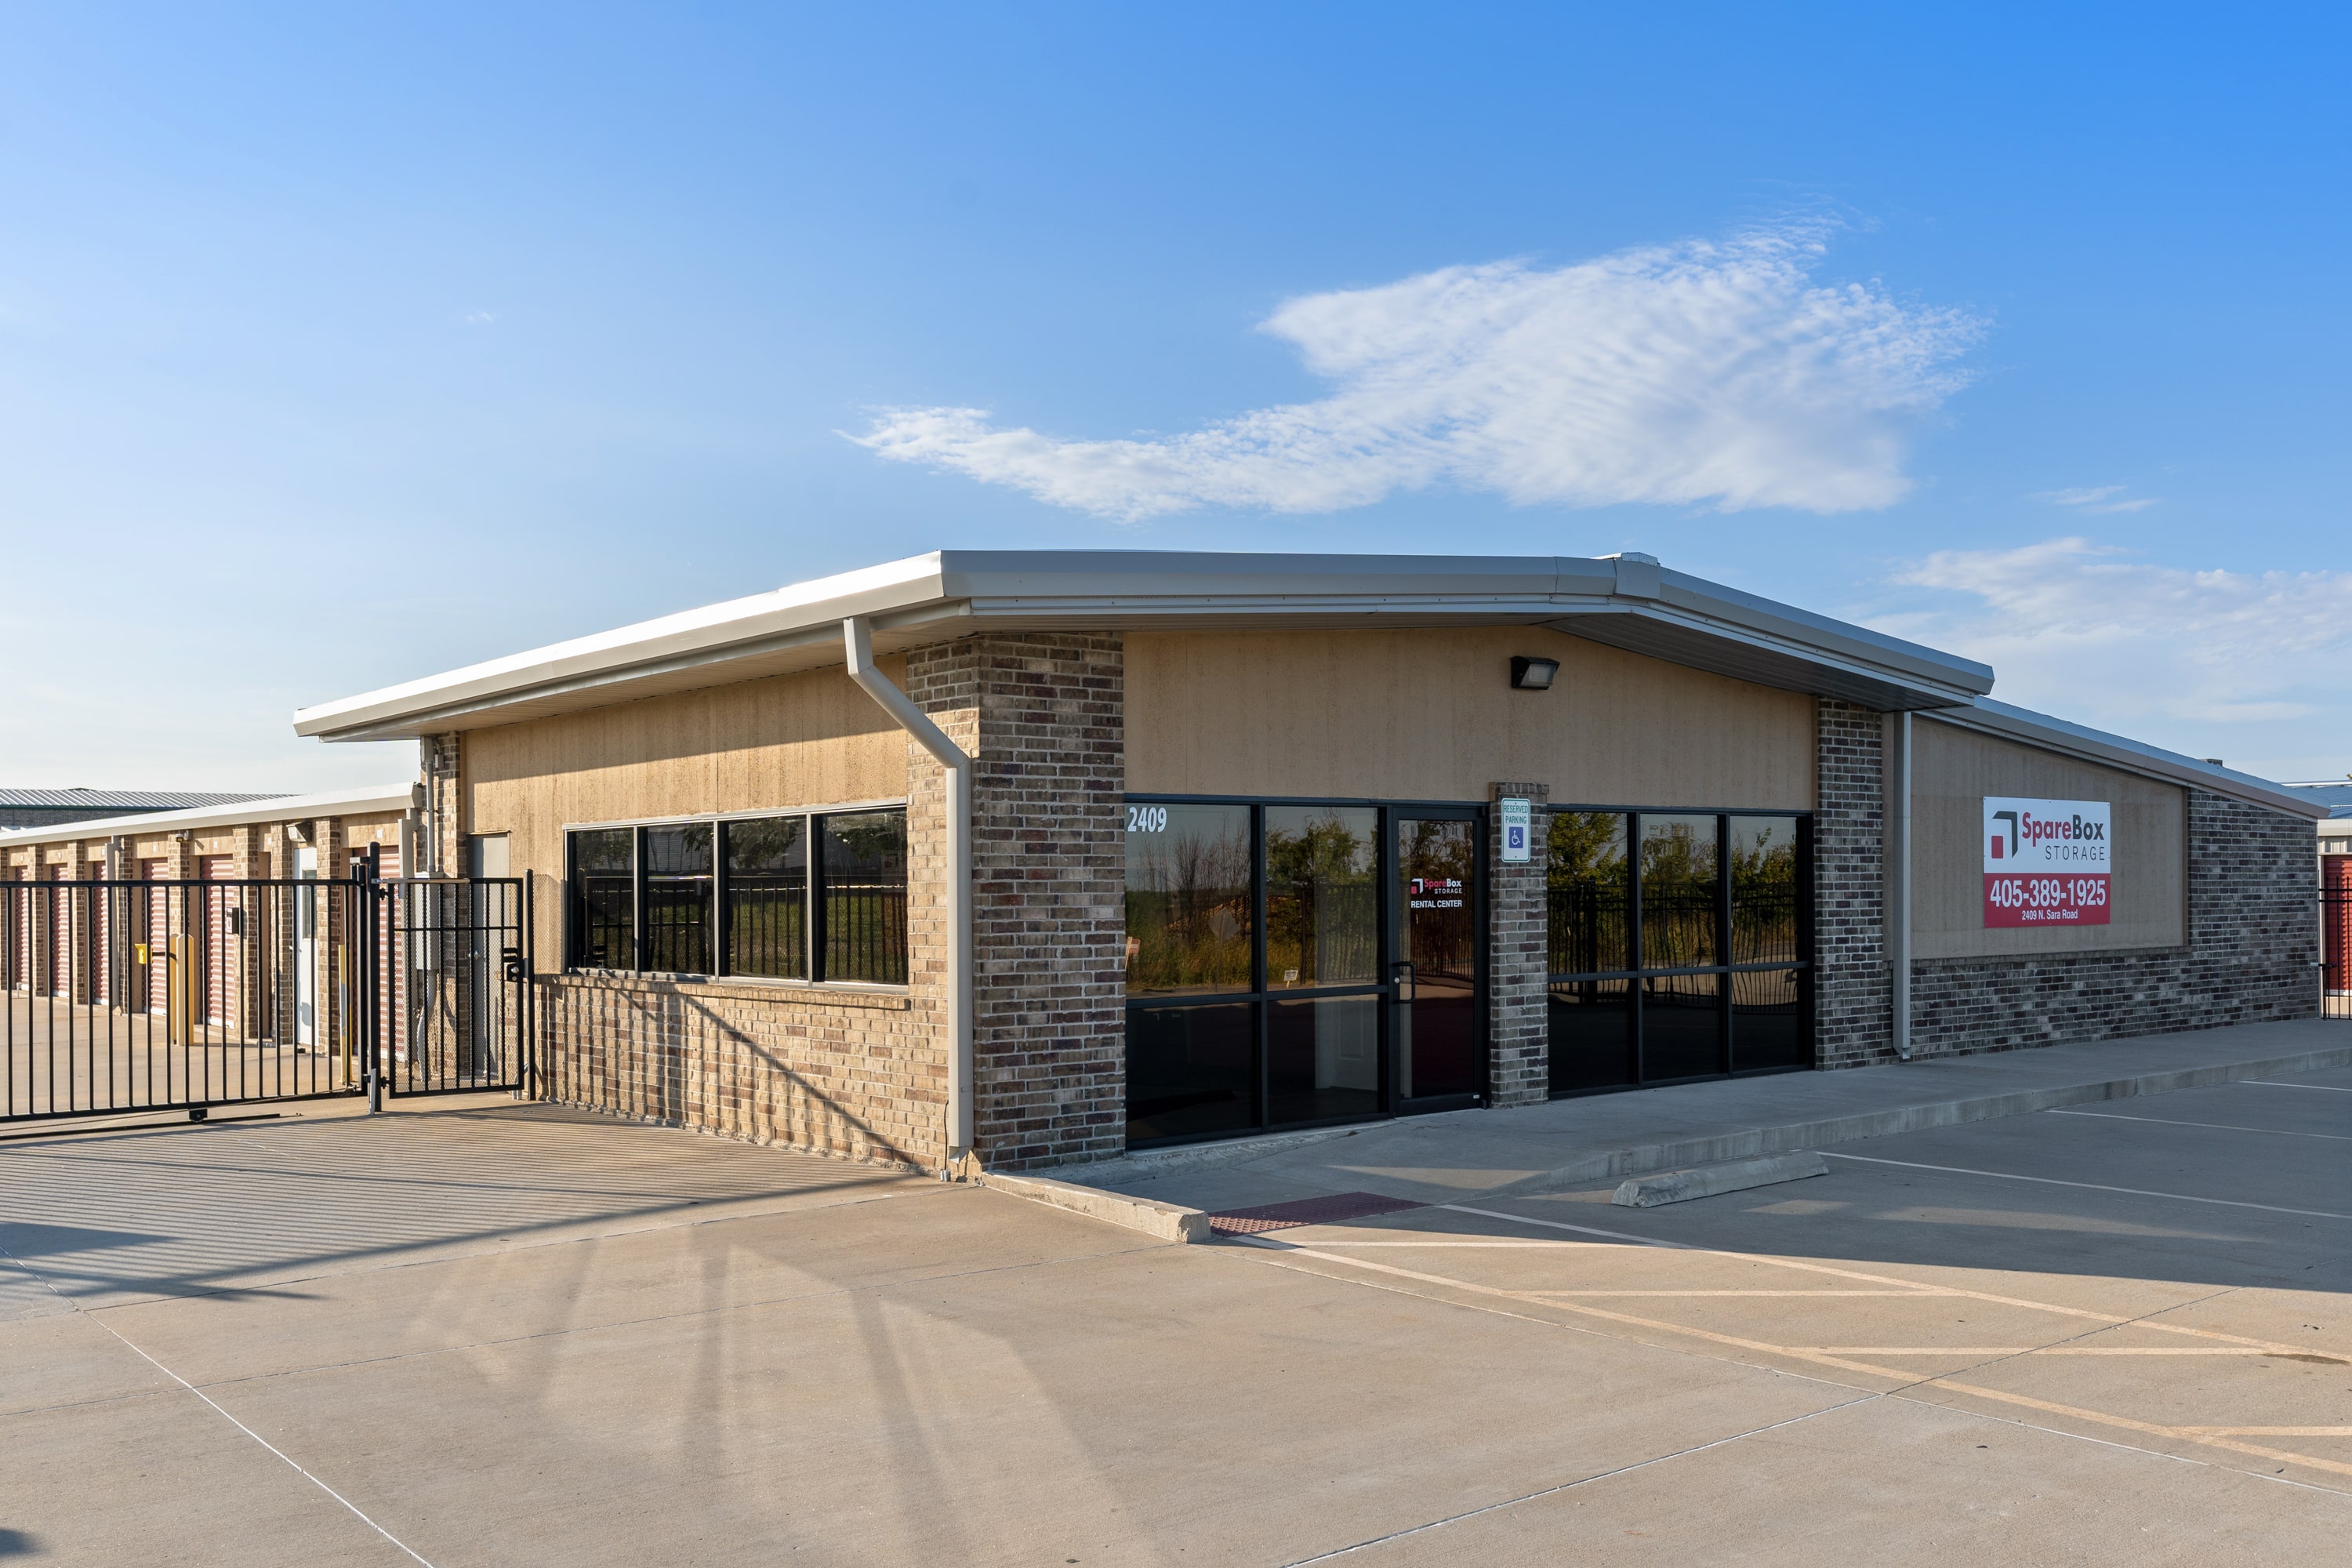 Meet all your self storage needs in Yukon, OK at our North Sara Road location | SpareBox Storage